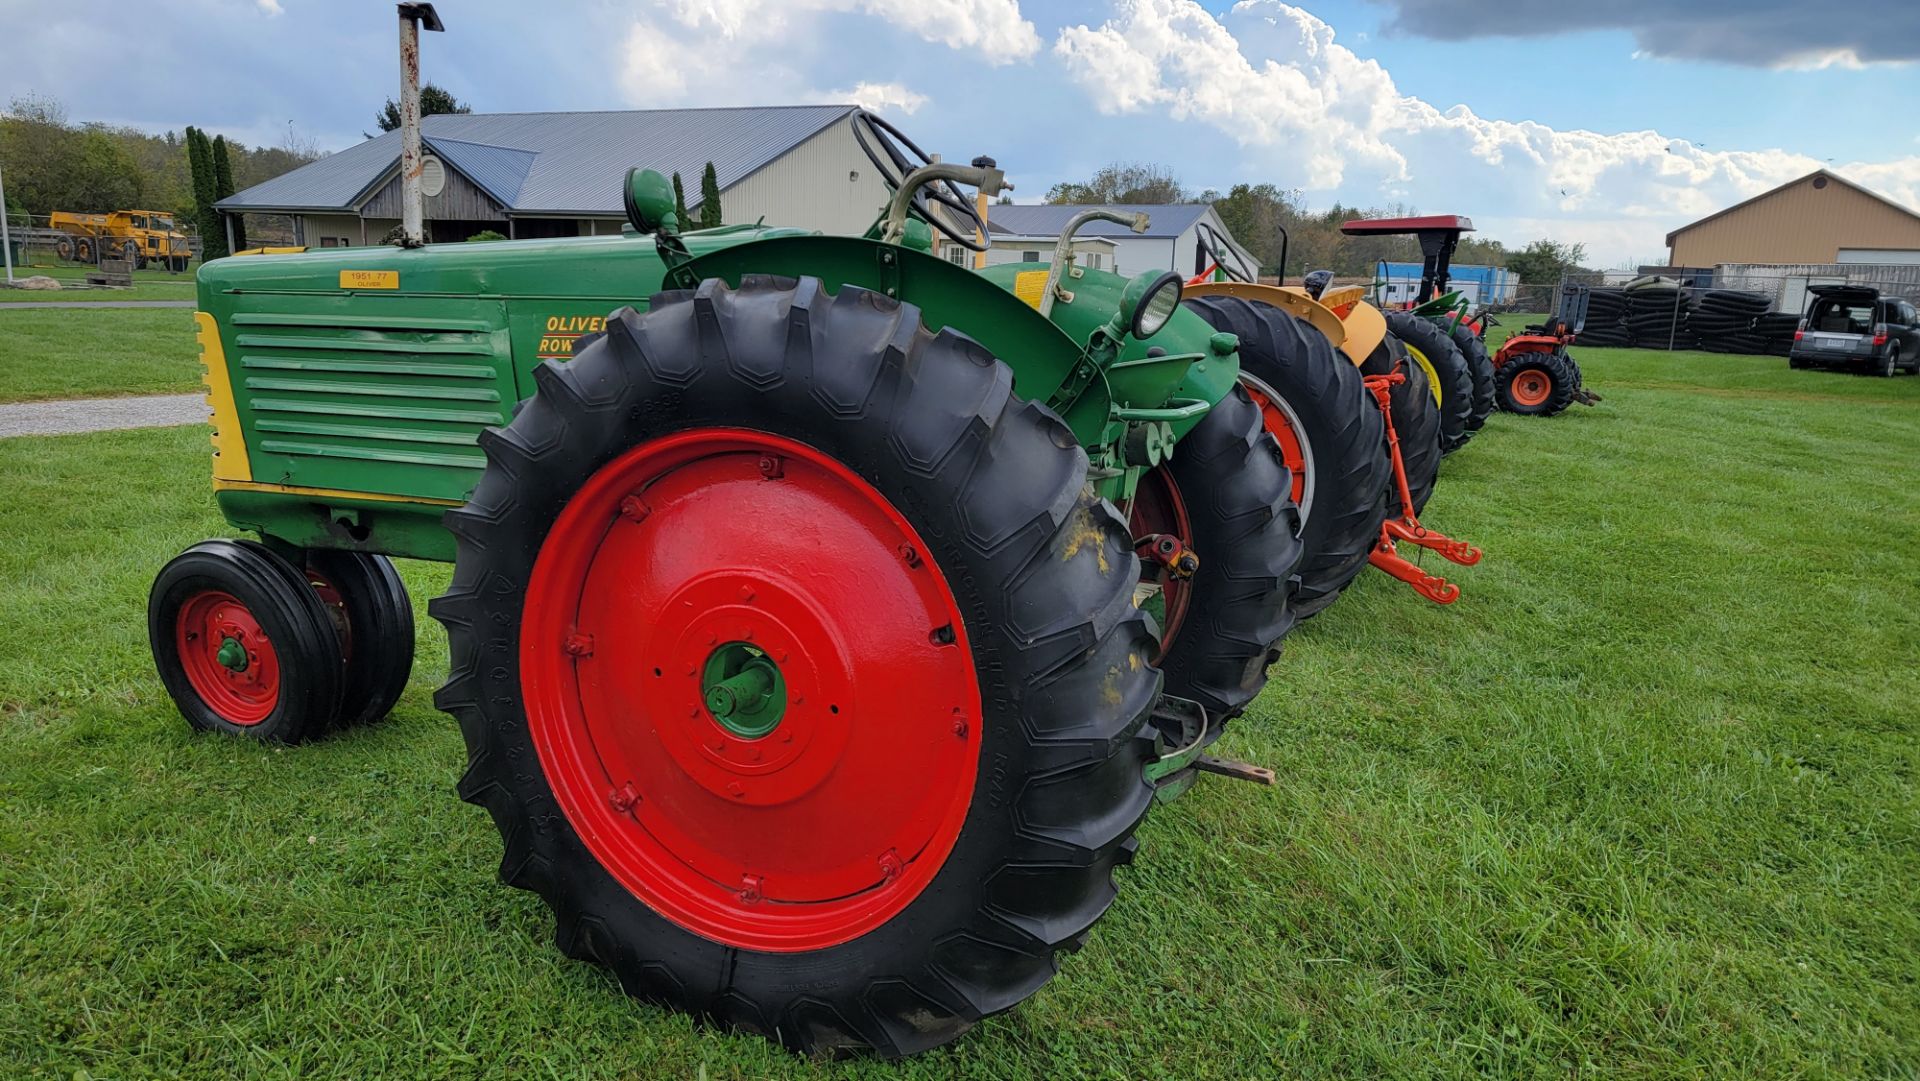 1951 Oliver 77 Row Crop Tractor, 6 Cylinder Gasoline Engine, Rear Hydraulics, Restored - Image 5 of 12